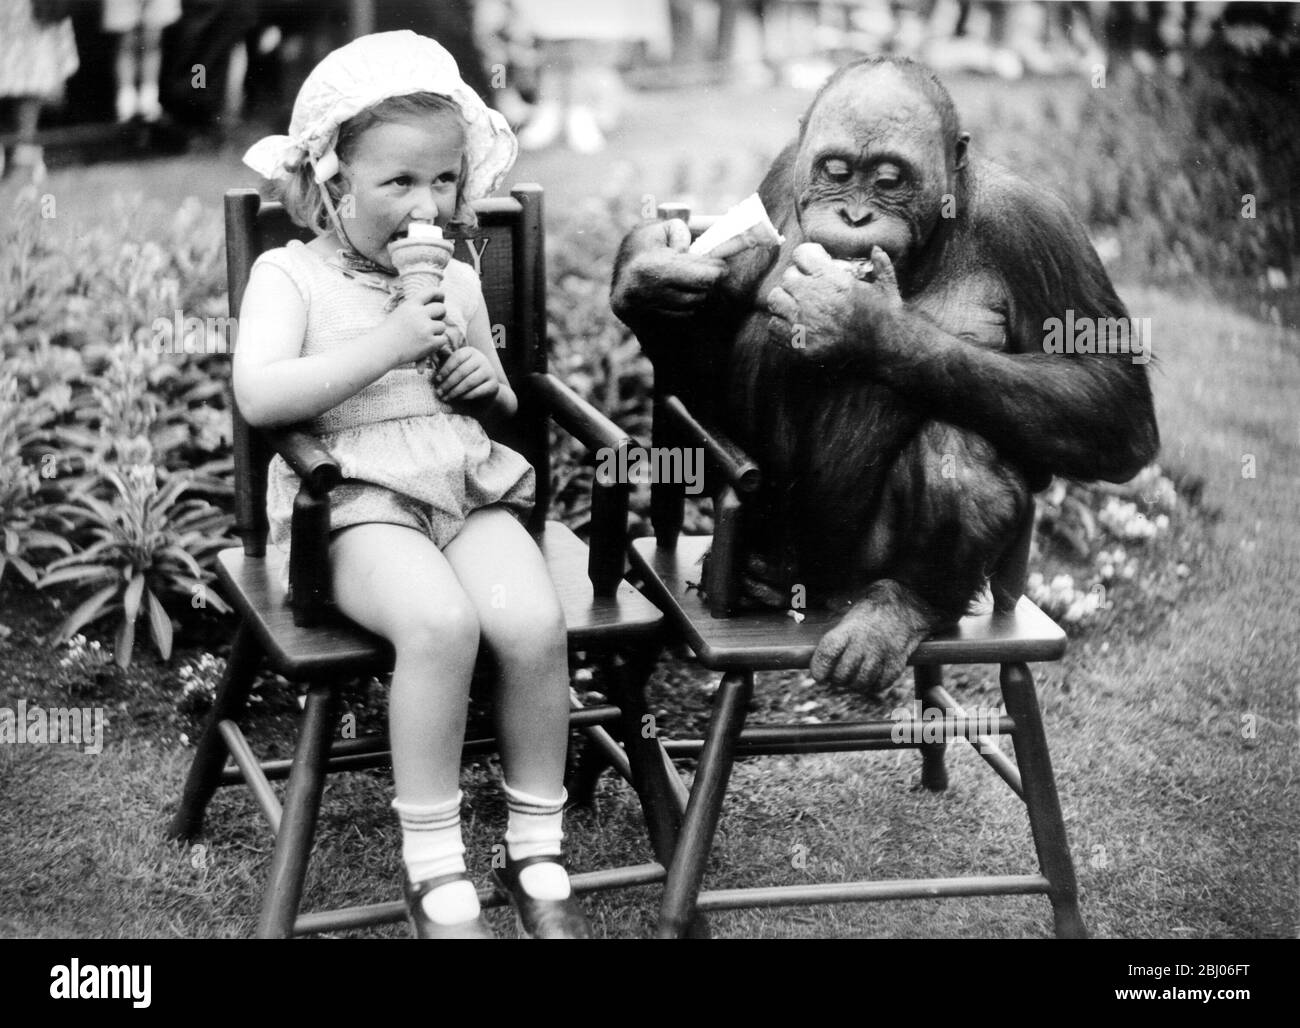 Every child loves ice cream but so does Spike, the Orang OUtan at London Zoo. When little Carol Phillips settled down in a chair to enjoy her ice cream cornet she attracted the attention of Spike who decided he too would like one. Judging from the expression on his face he found it to his liking, even though the coldness of the ice did take away his breath at the first bite. - June 30th 1949 Stock Photo